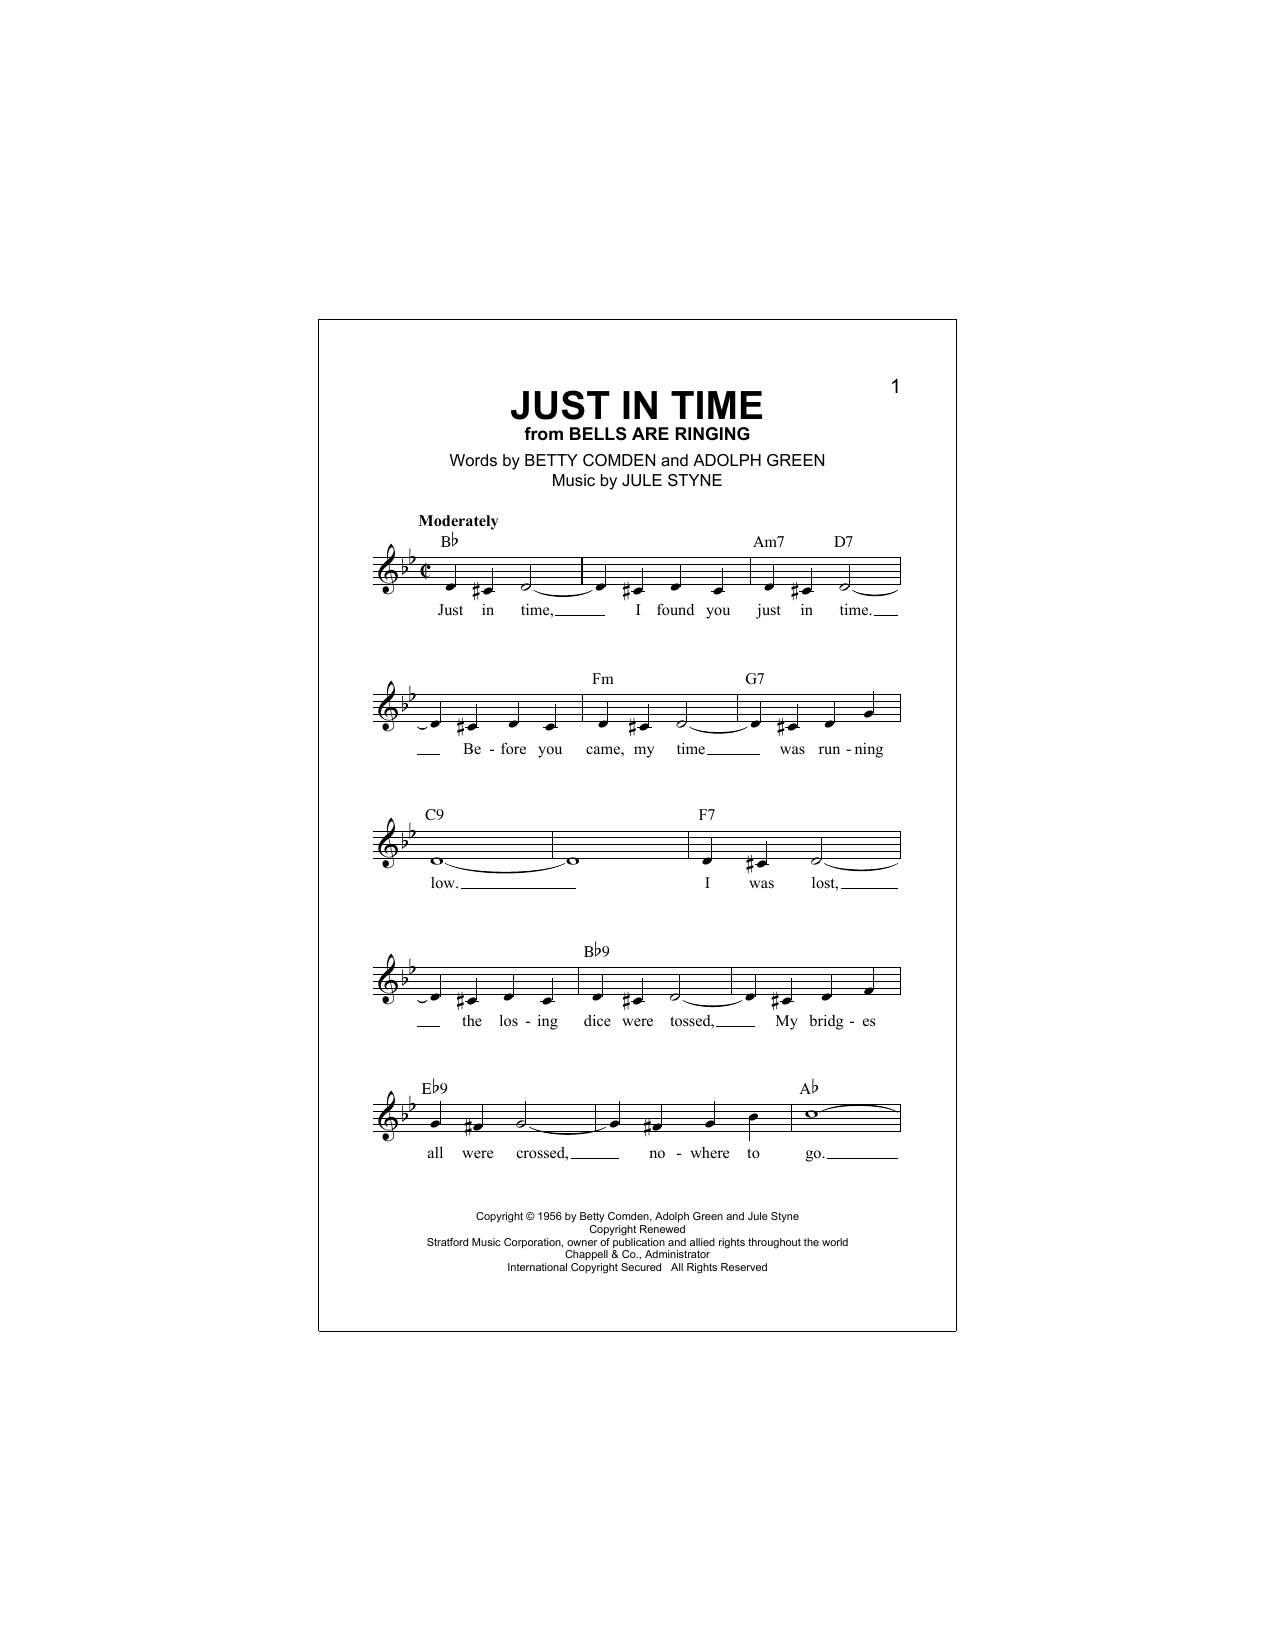 Download Adolph Green Just In Time Sheet Music